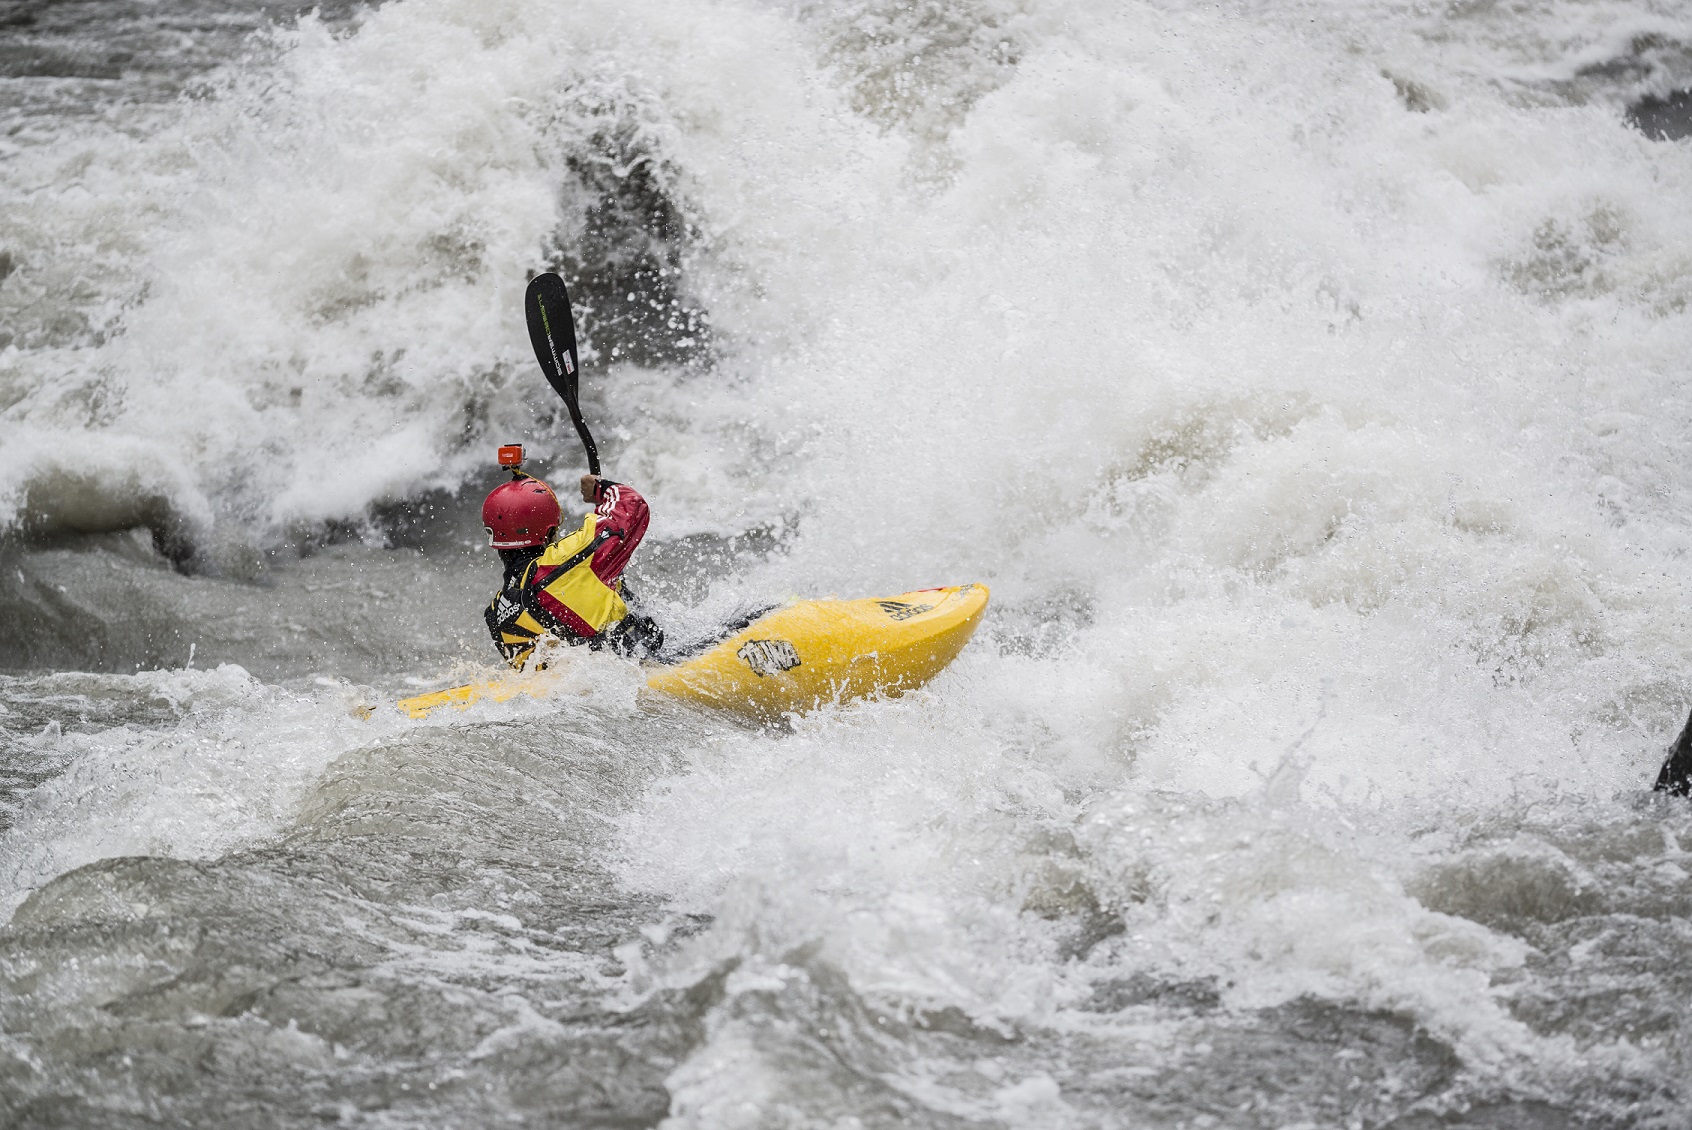 WOF 2014#35: Outdoorsportsteam - Stikine River & Place of Happiness